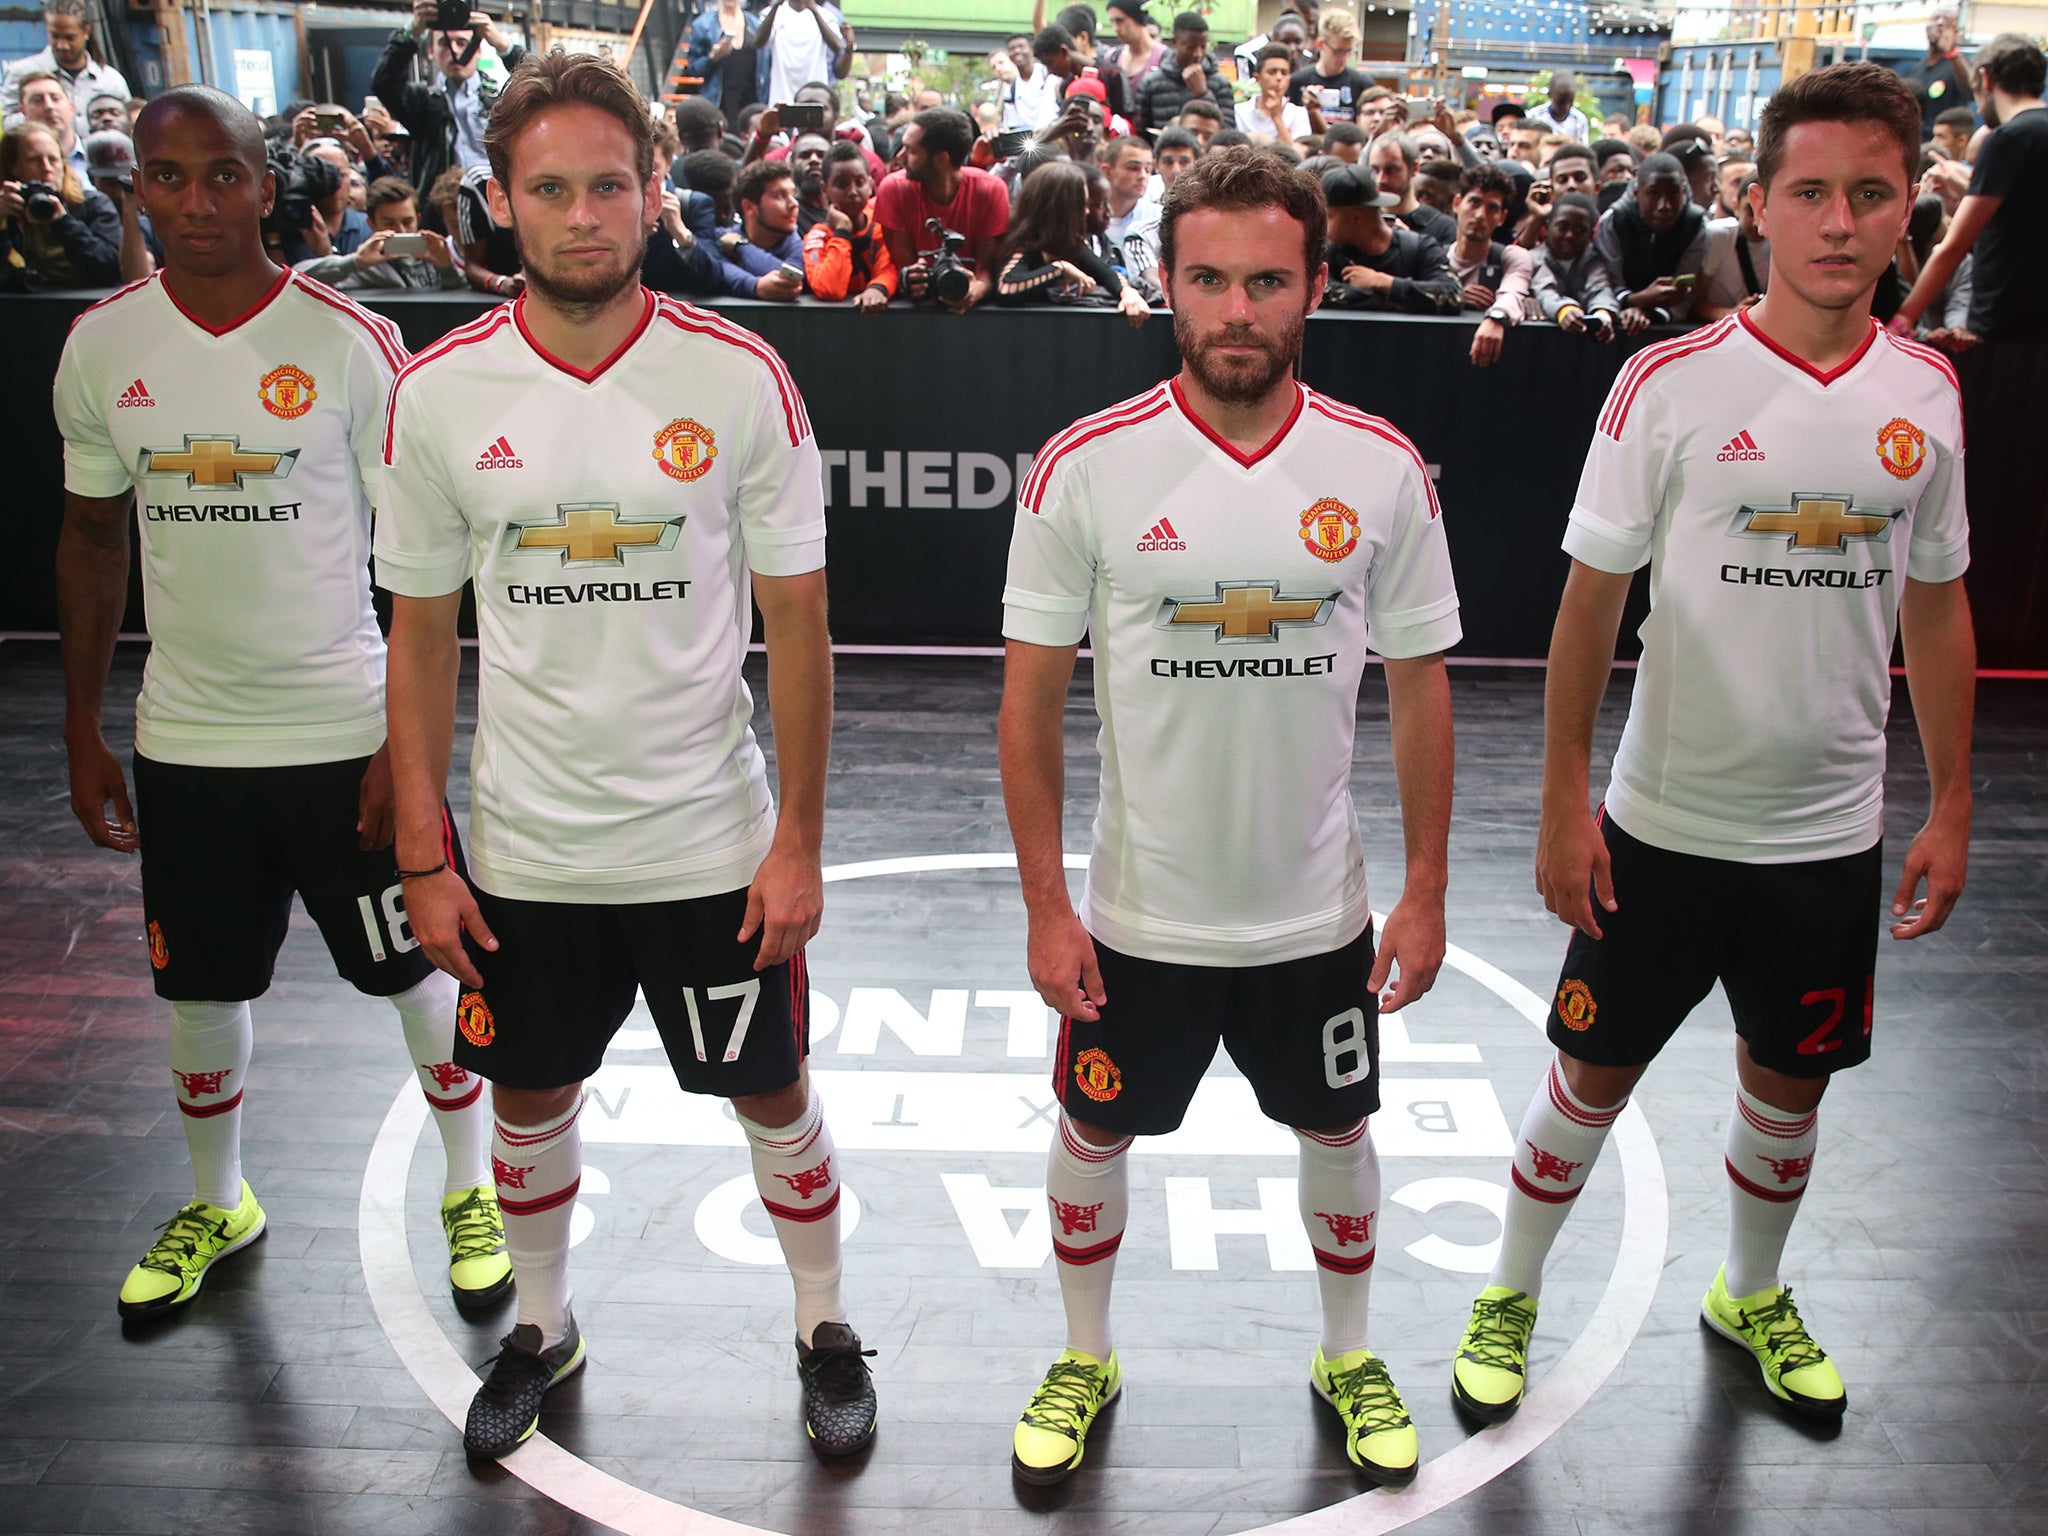 Ashley Young, Daley Blind, Juan Mata and Ander Herrera pose to promote Manchester United's Adidas away strip